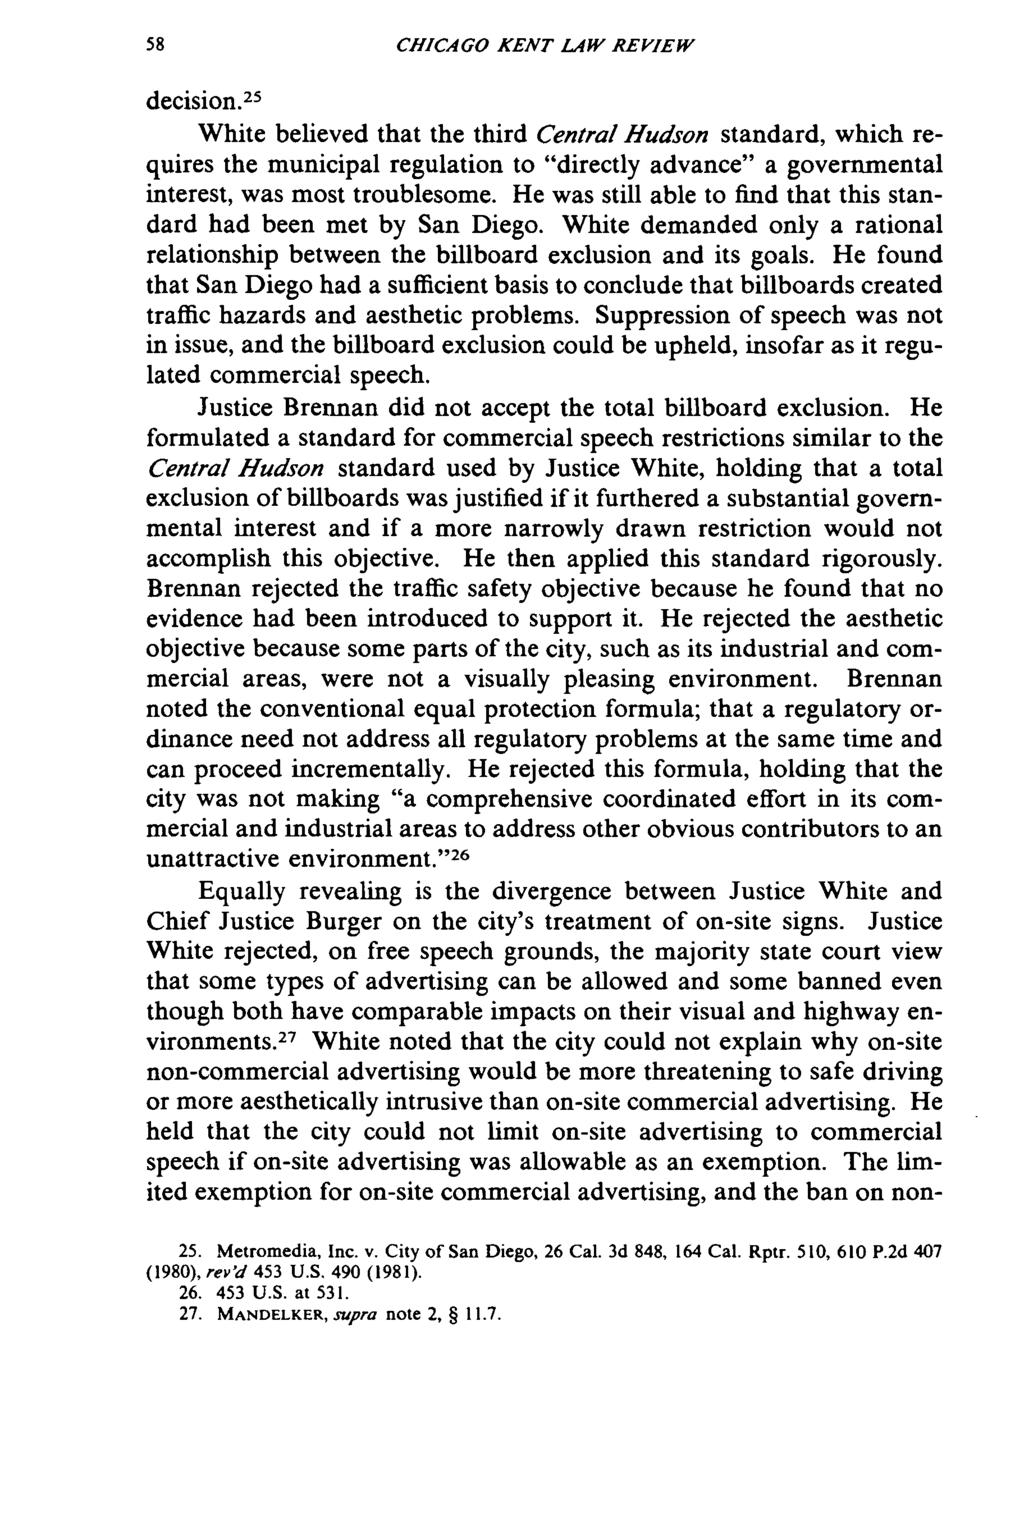 CHICAGO KENT LAW REVIEW decision. 25 White believed that the third Central Hudson standard, which requires the municipal regulation to "directly advance" a governmental interest, was most troublesome.